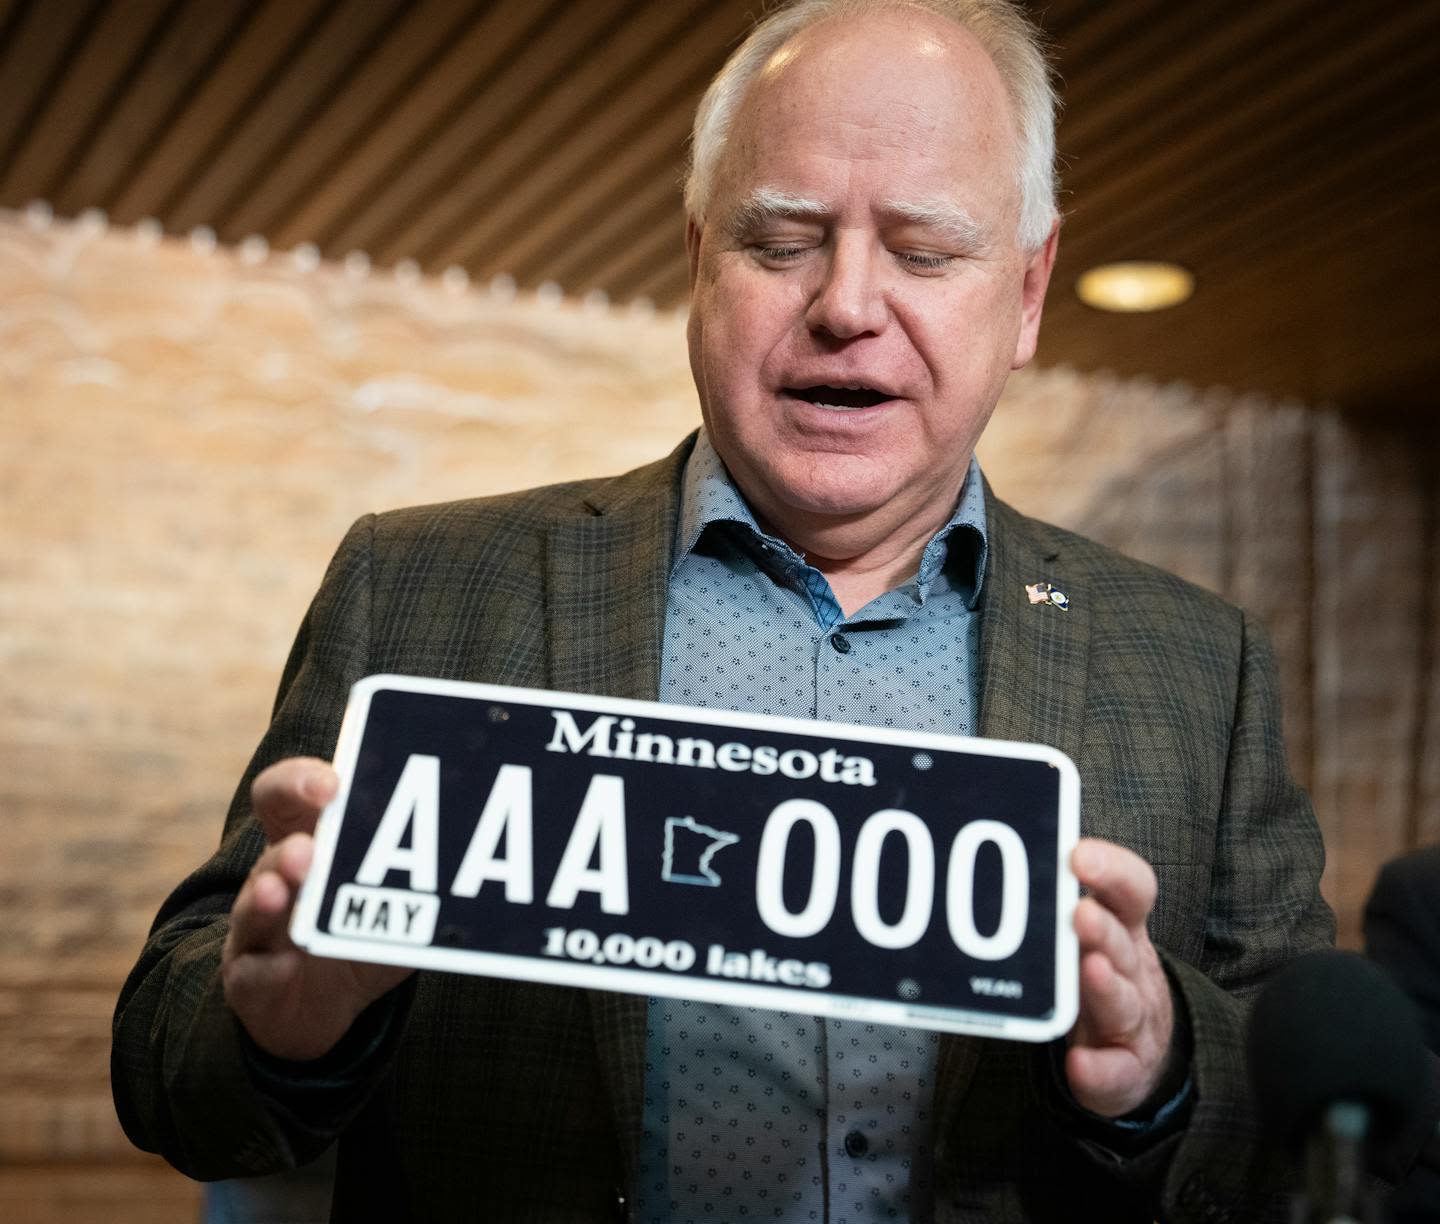 Blackout license plates: Eyesore or sight for sore eyes?